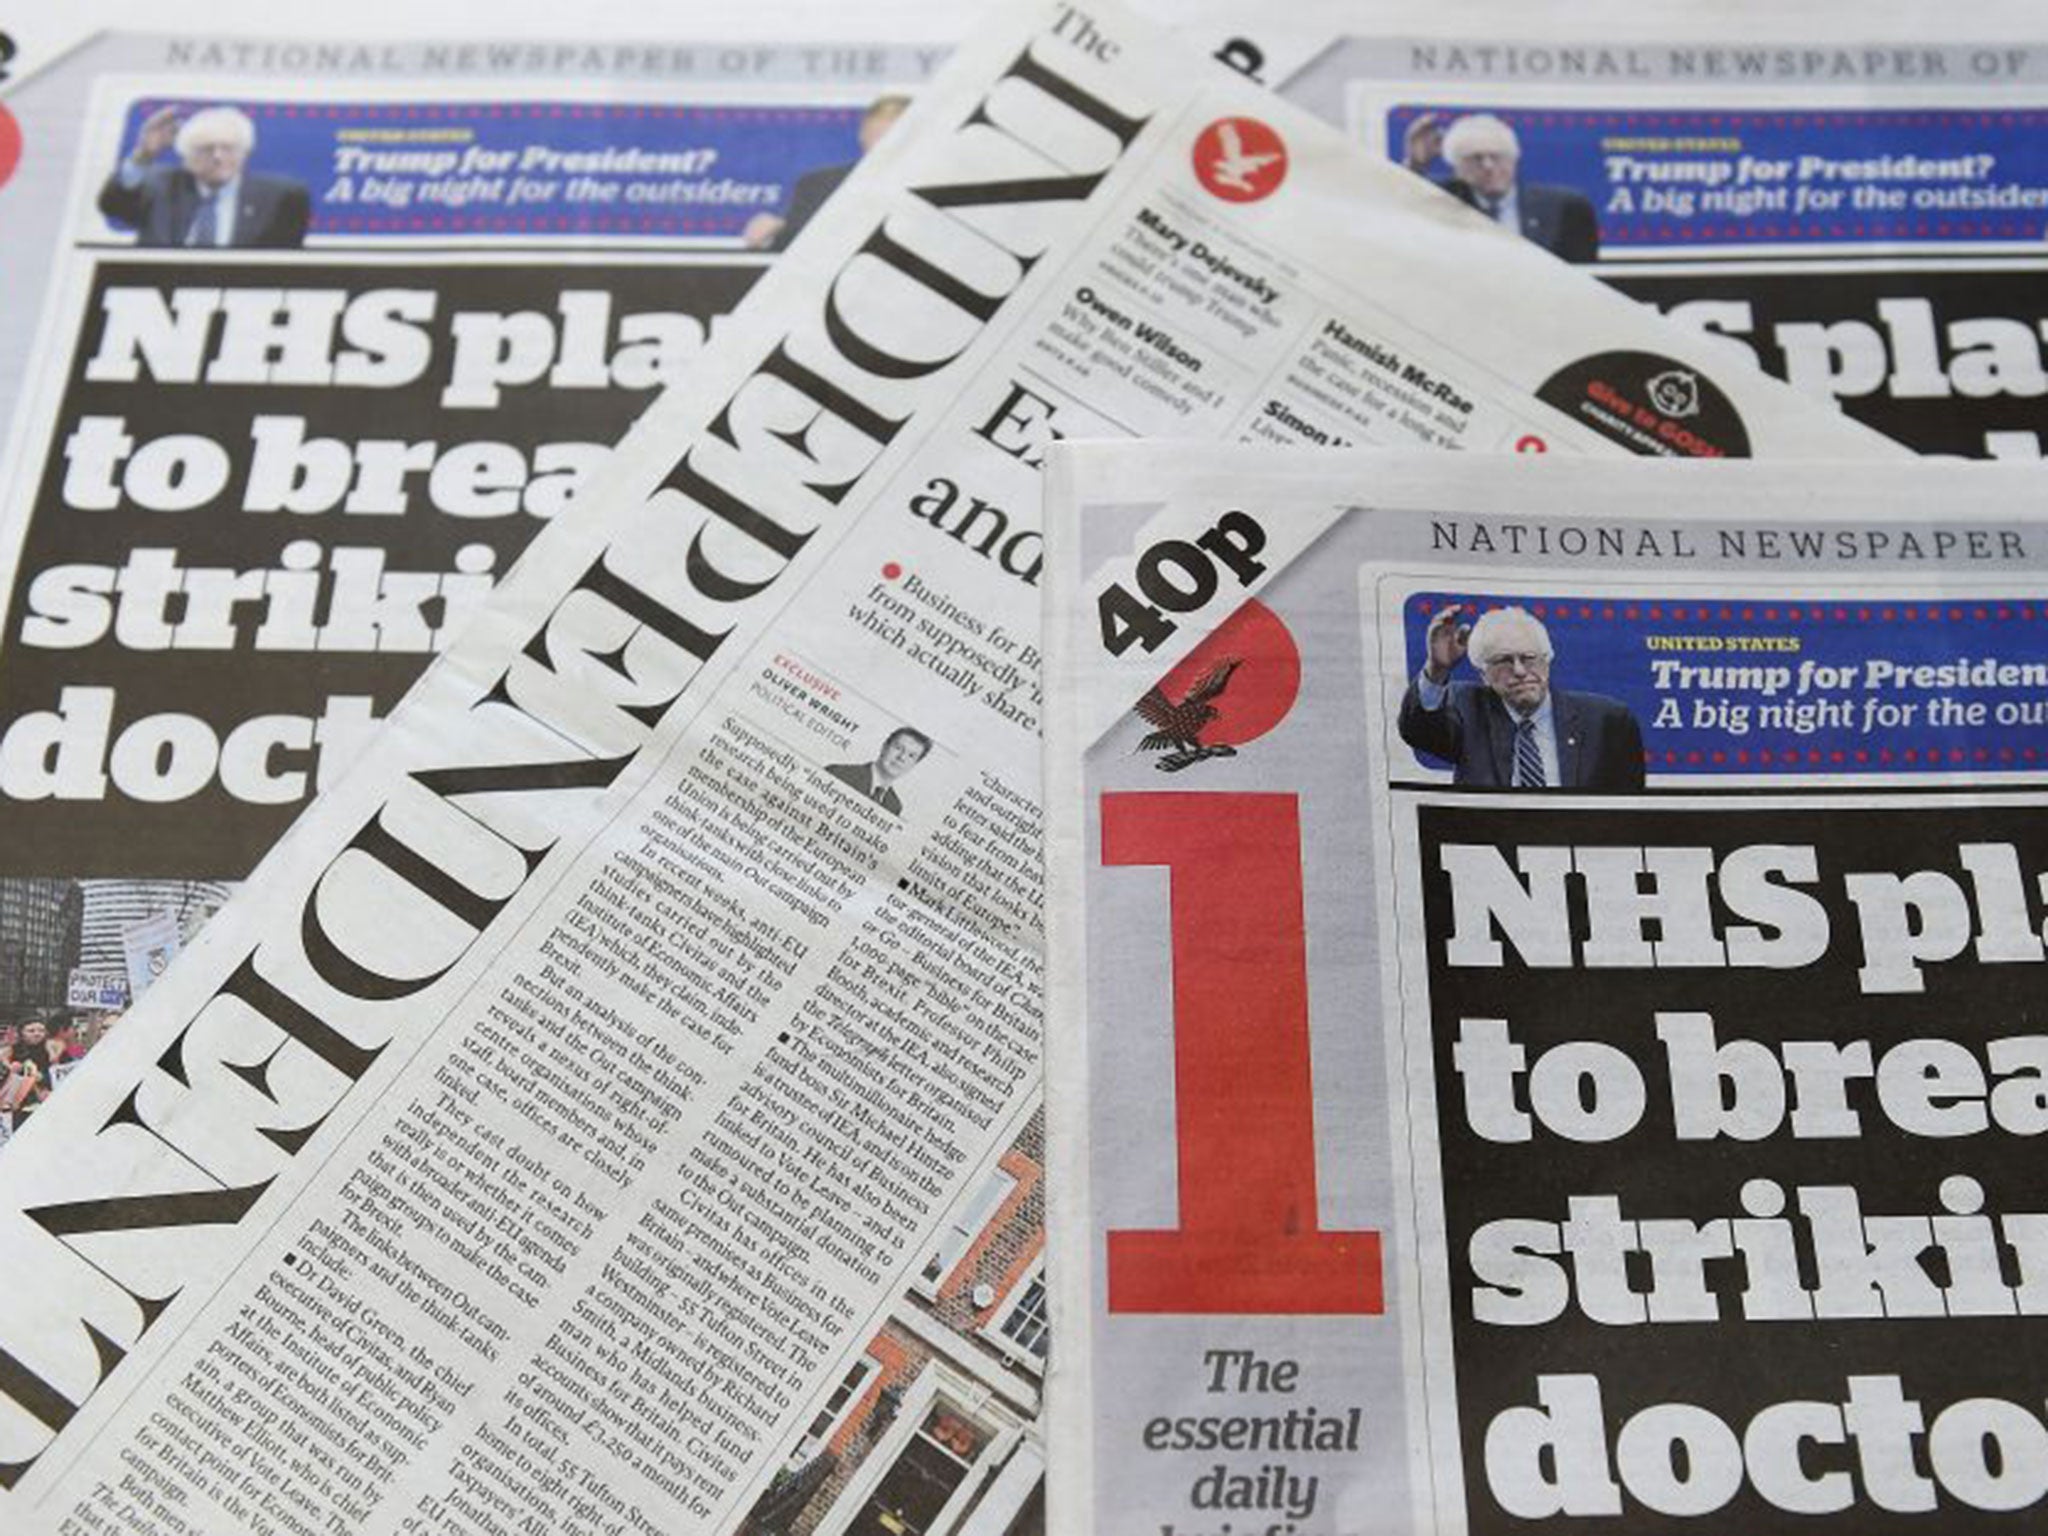 Johnston Press are in talks to buy the i newspaper